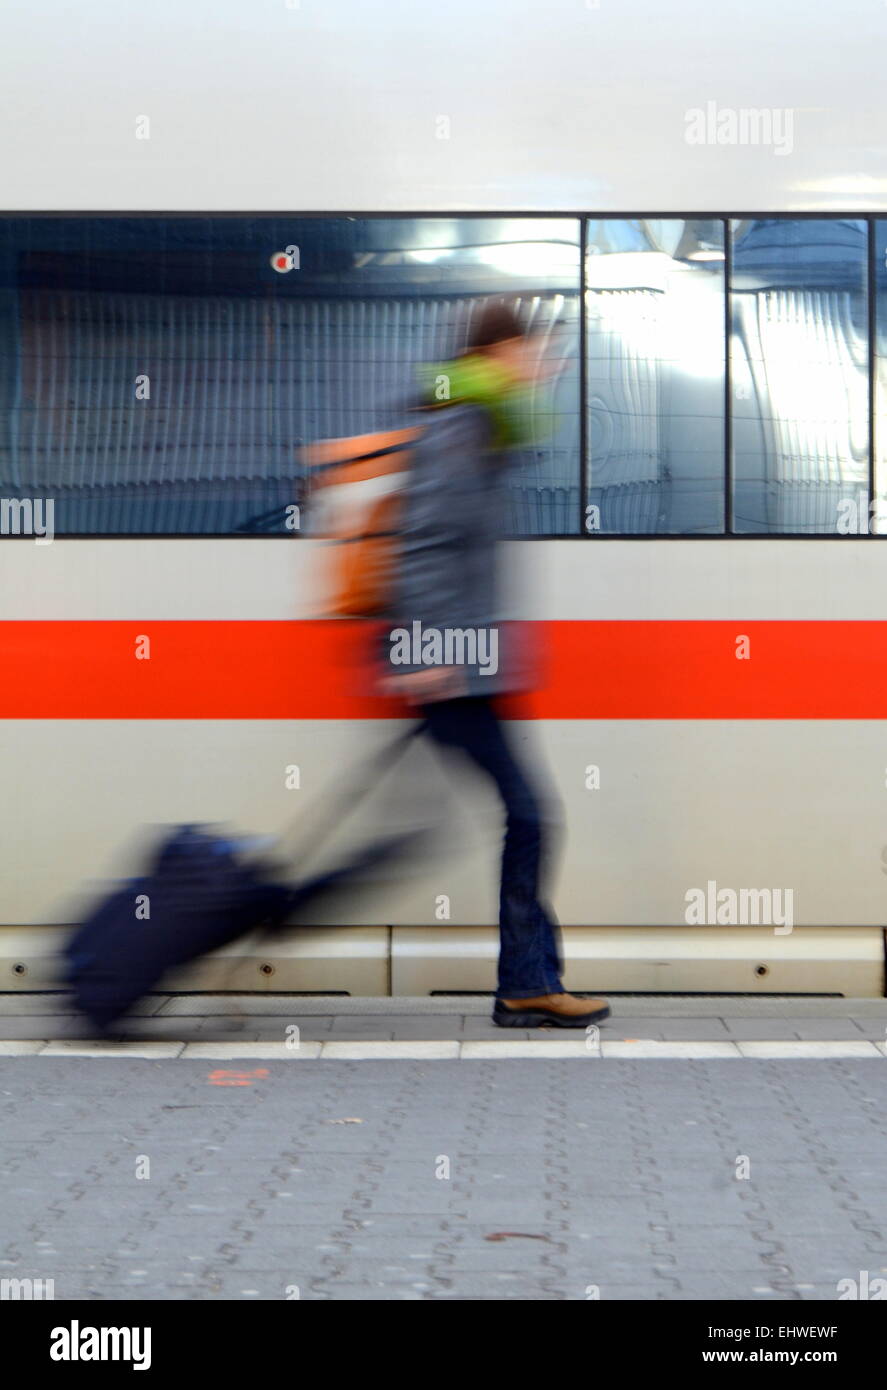 Travel Image Of A Motion Blurred Student Rushing To Catch A Train Stock Photo